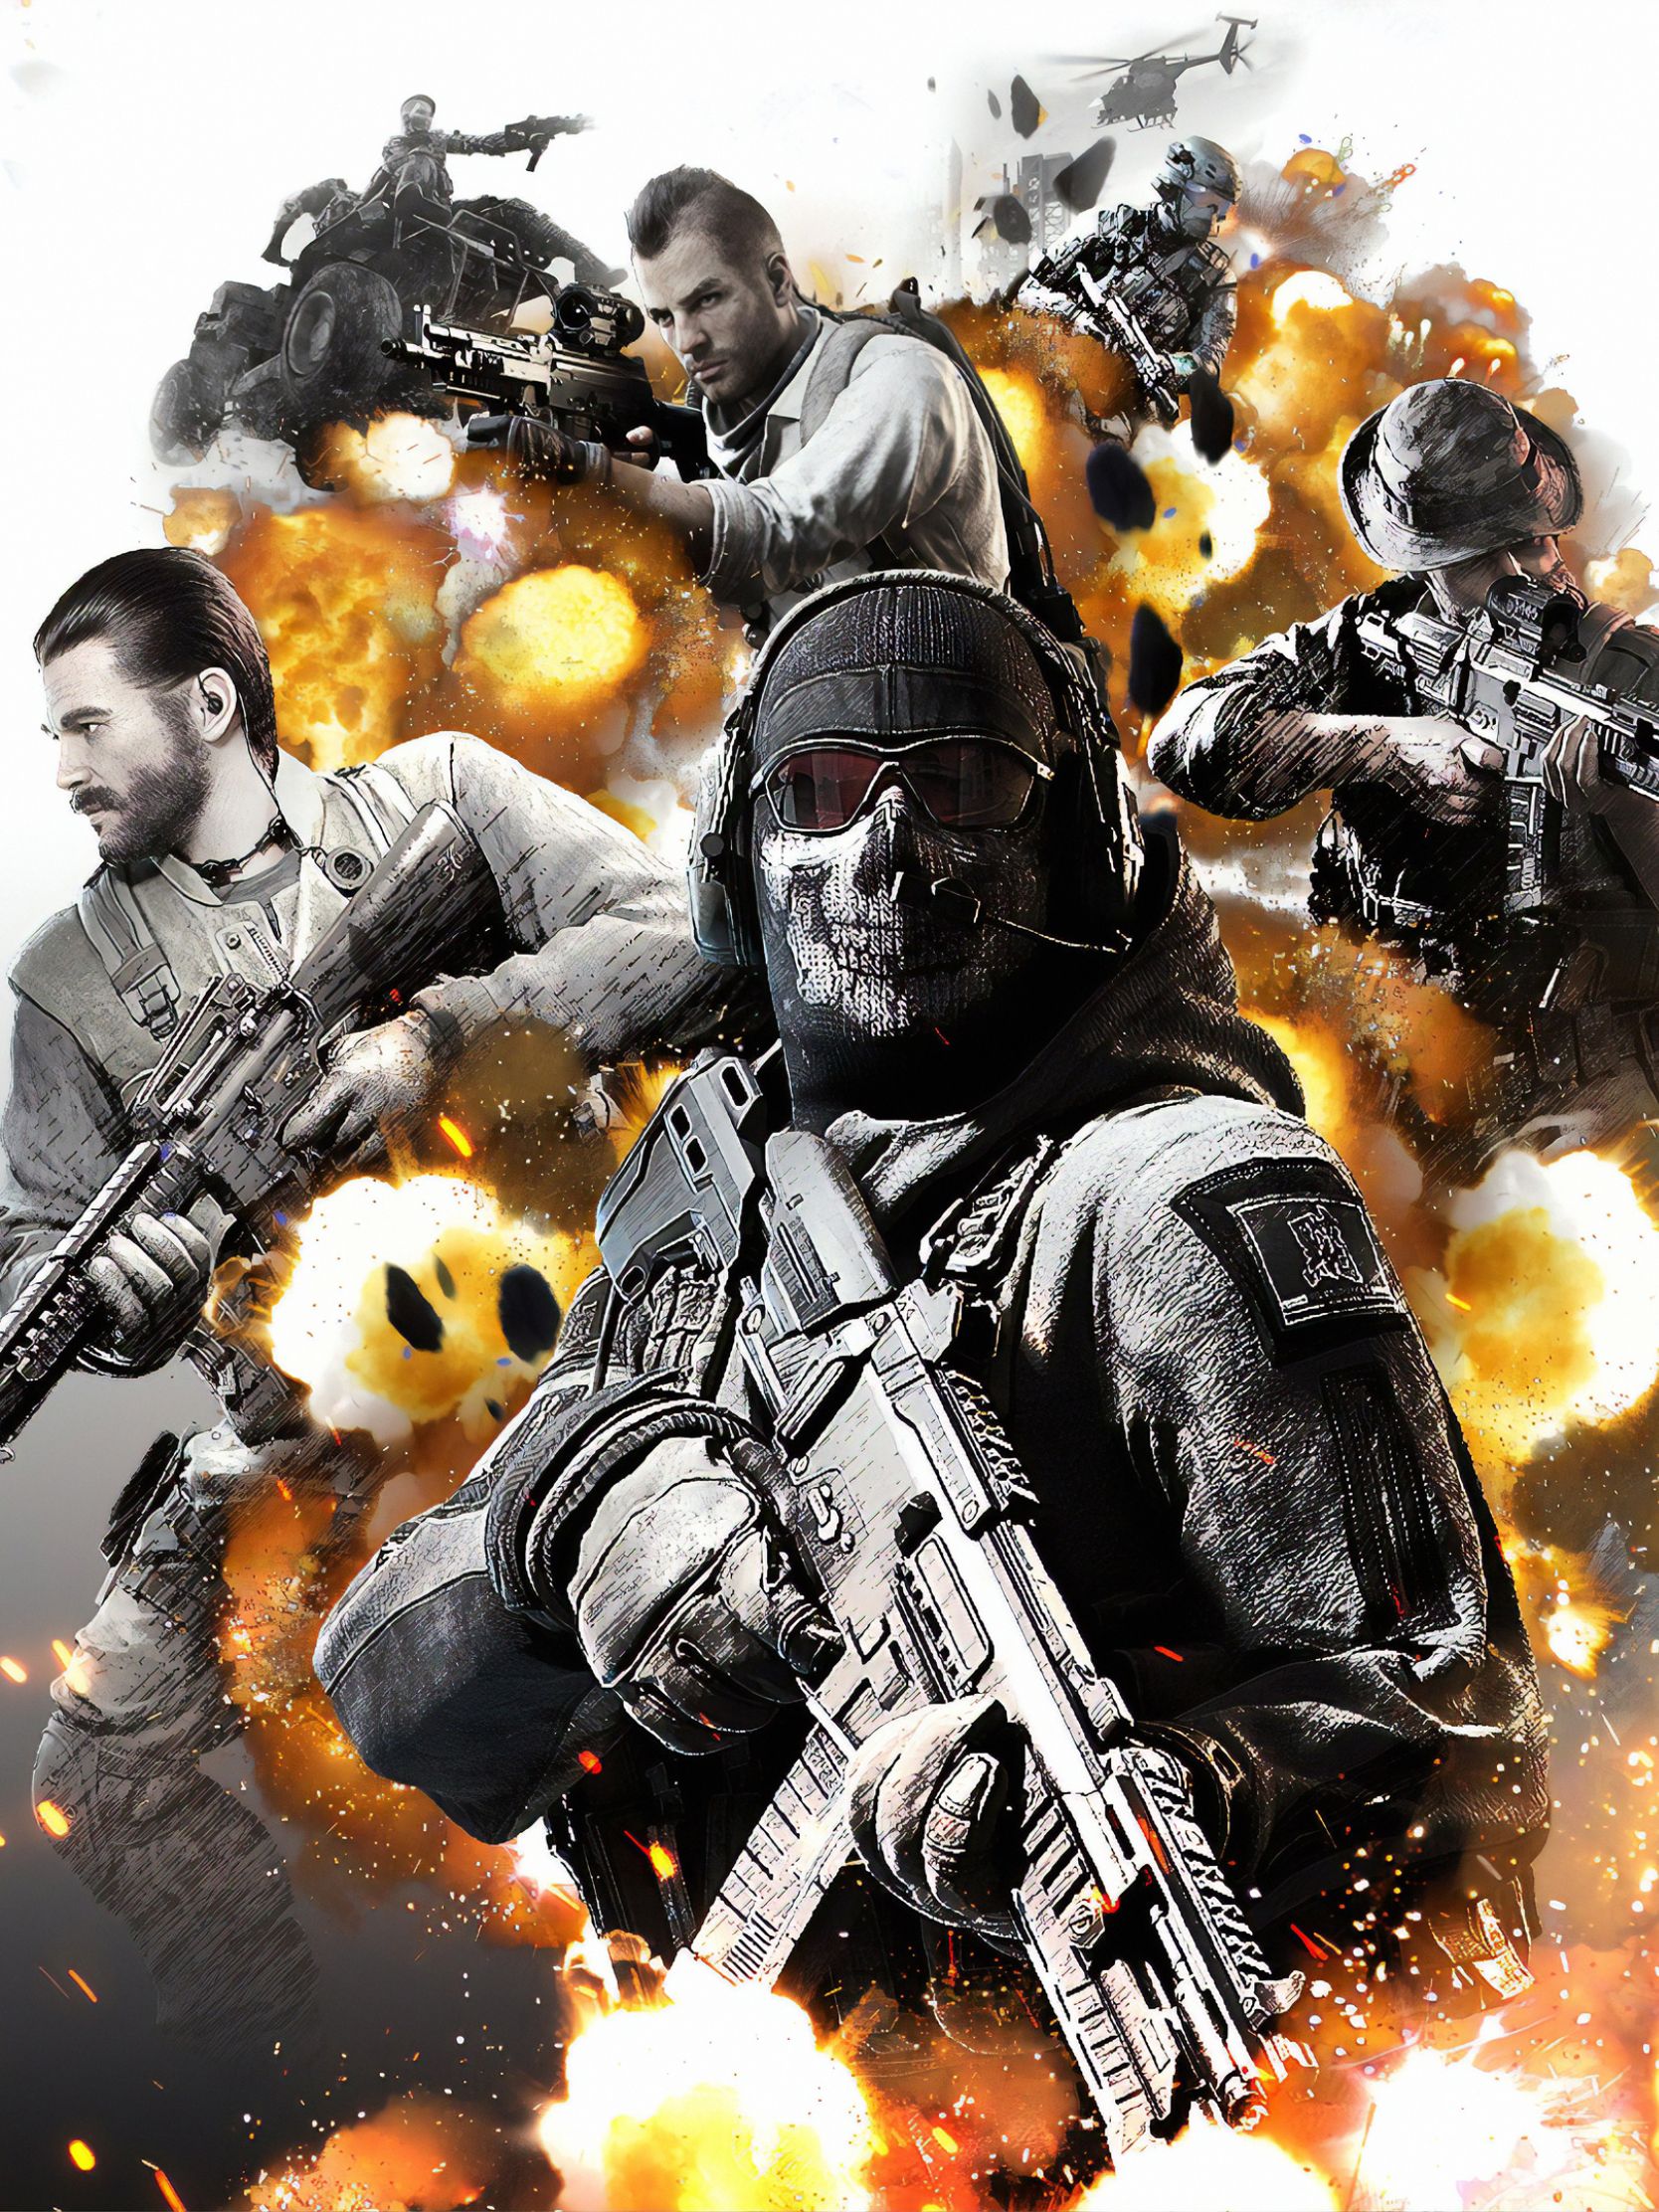 Call of Duty Mobile Poster 1668x2224 Resolution Wallpaper, HD Games 4K Wallpaper, Image, Photo and Background